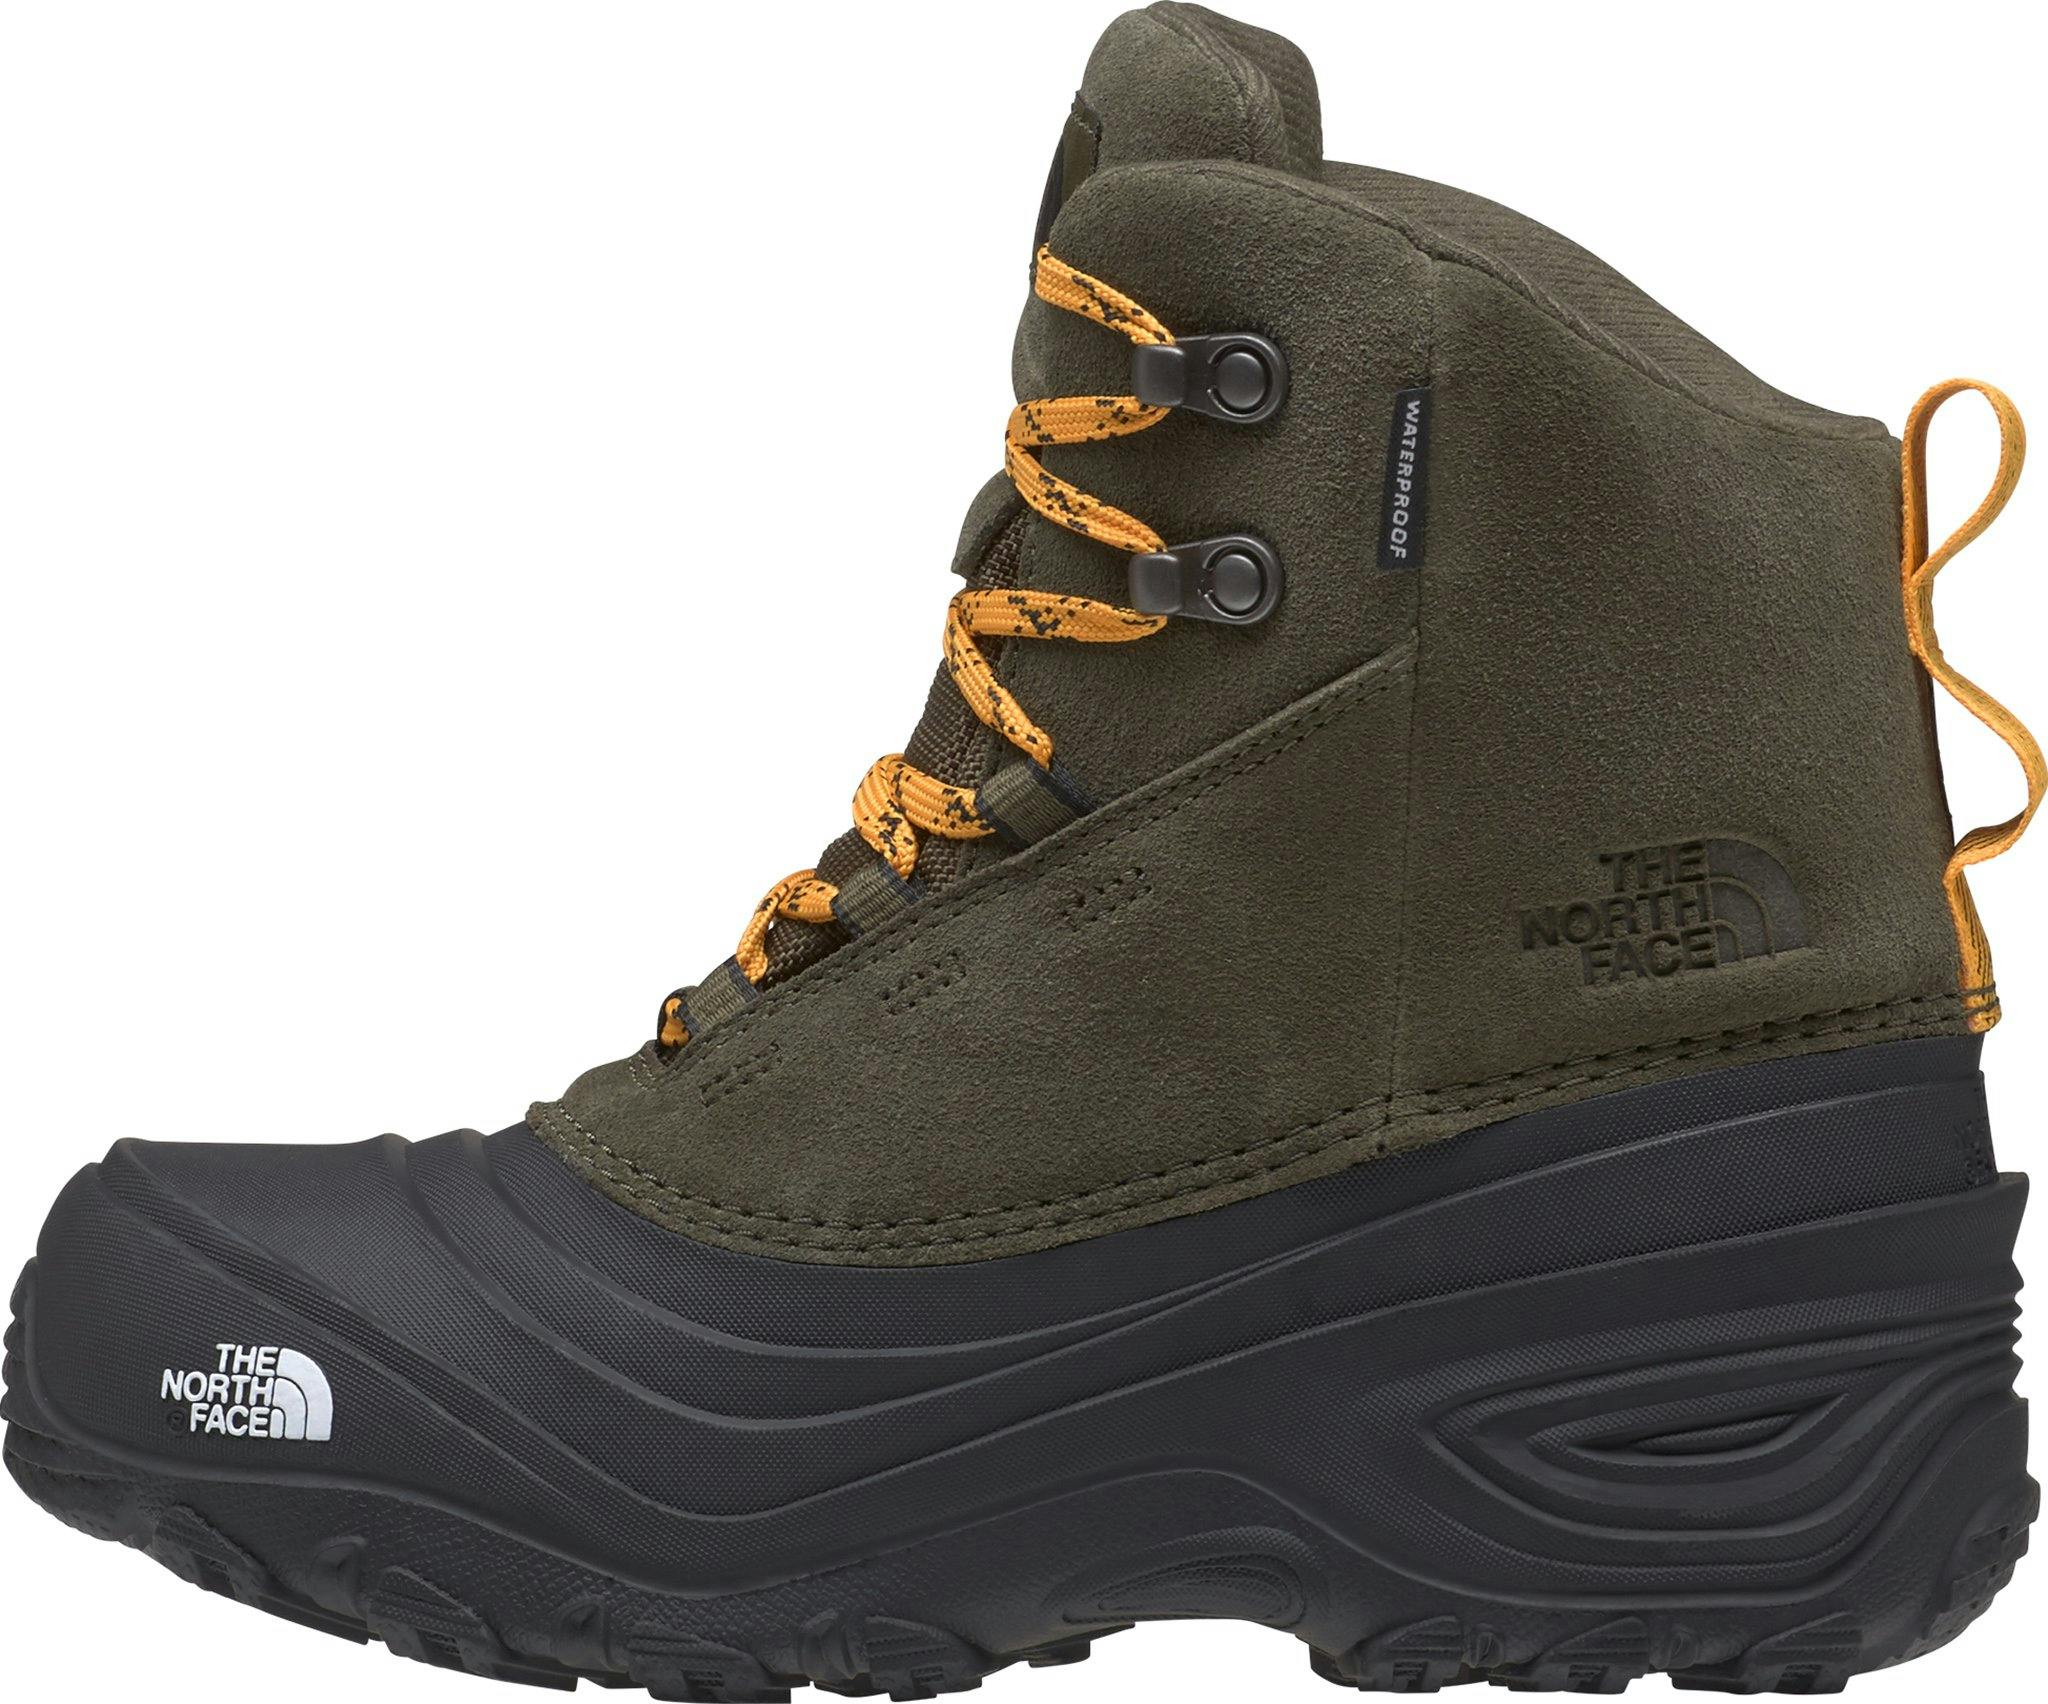 Product image for Chilkat V Lace Waterproof Boots - Youth